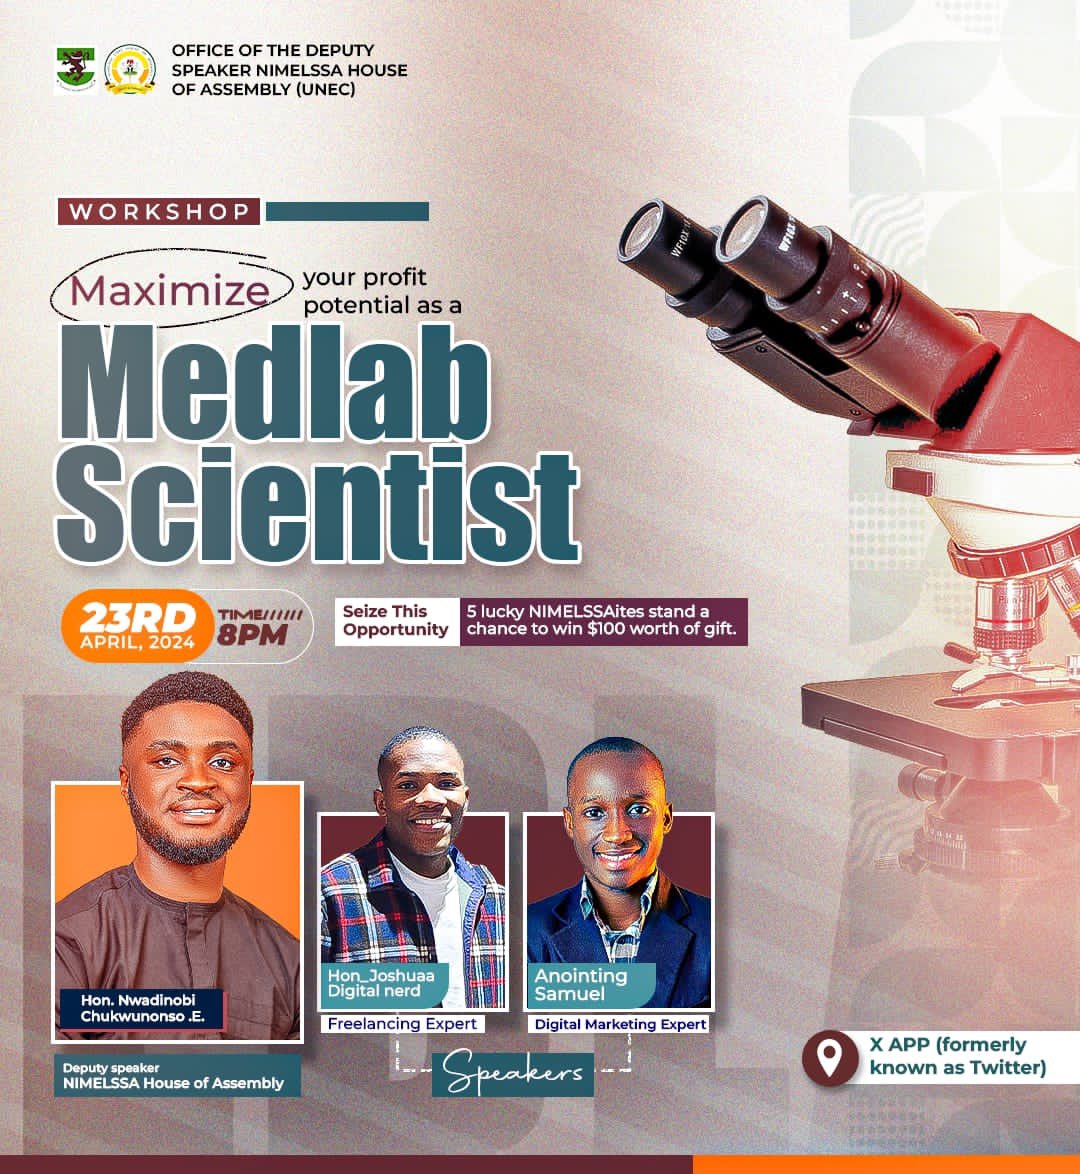 Are you a medlab Scientist? and yet no skill to boost of,  worry no more as this workshop has come to impact and equip you with the world ranking skill acquisition. Stay tune and get connected!
Longlive @HouseUnec46329